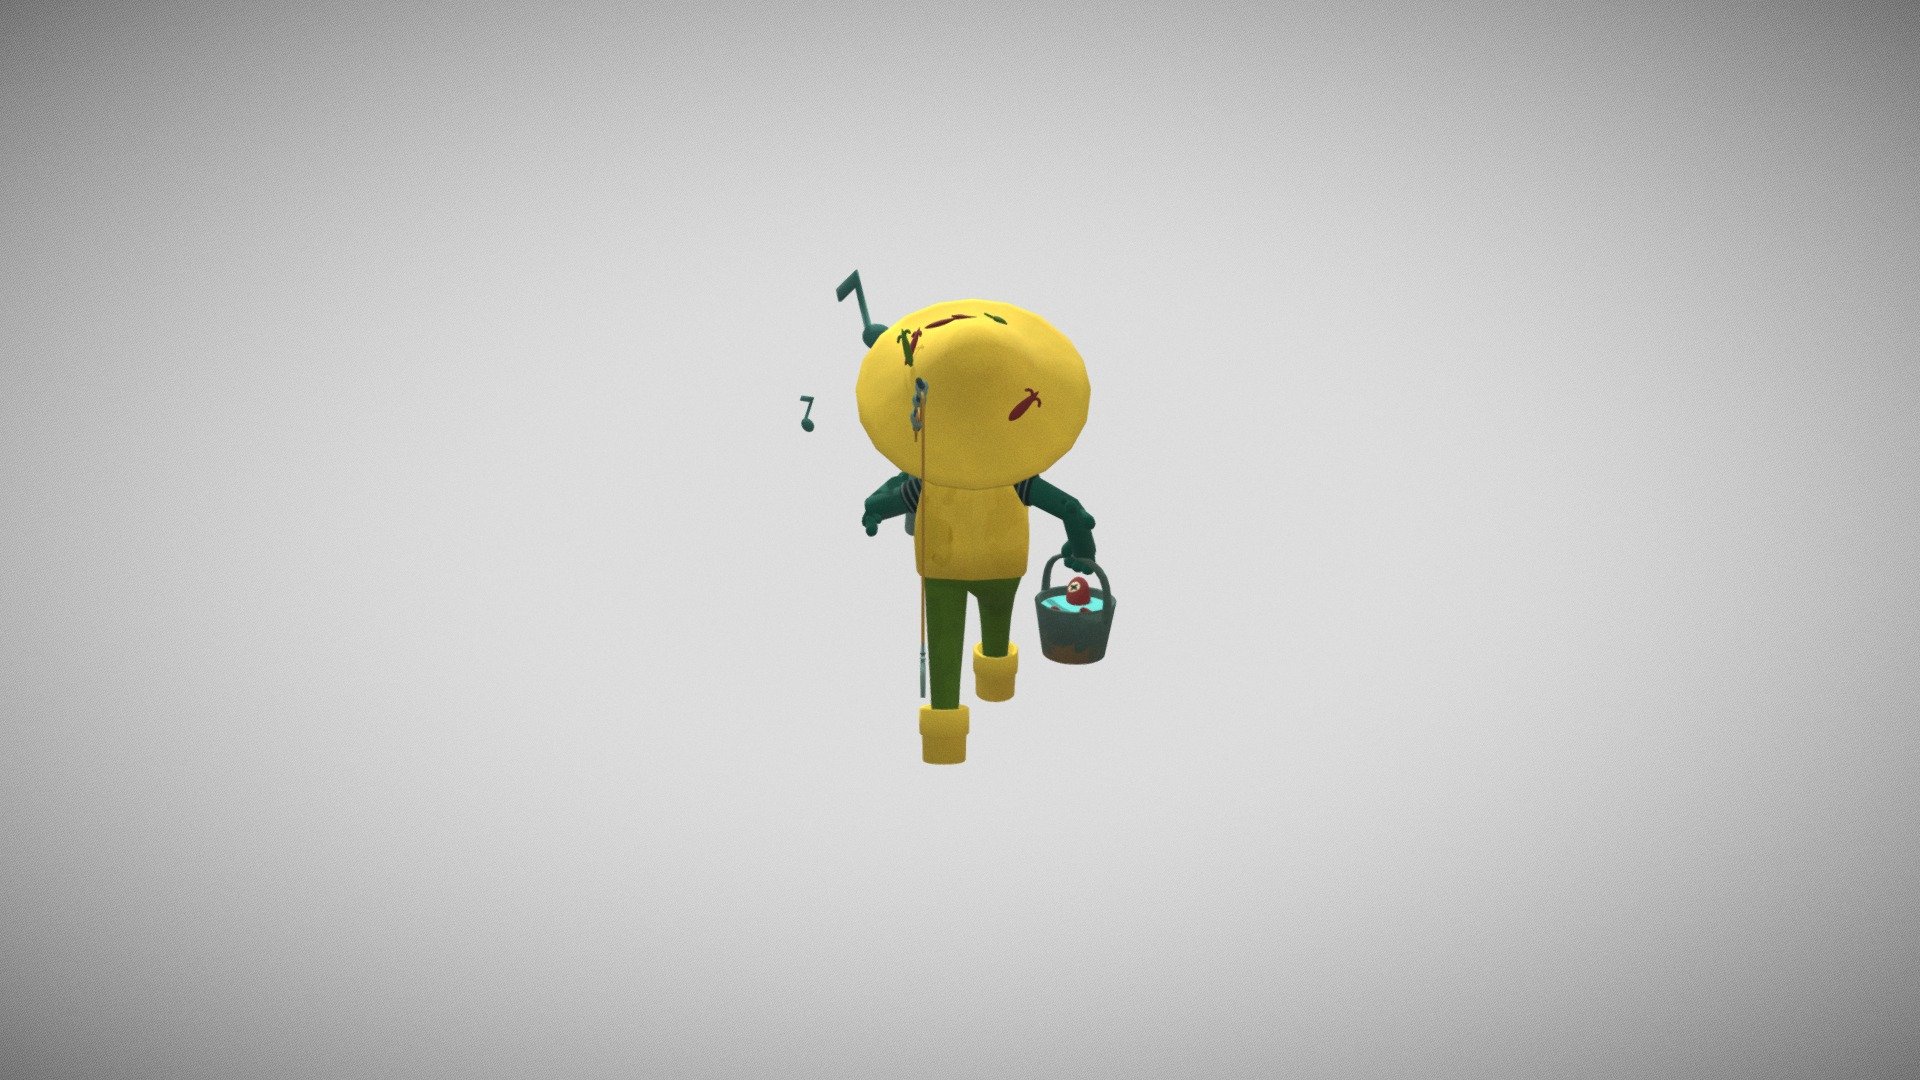 Little project based on Salomé Lysimaque Chapuis's concept (https://www.instagram.com/p/B8HdztiCz5Z/) 

Modeling and animation in blender

Had a lot of fun on it ! - Cormoran Fisherman - 3D model by melanie.lhuillier 3d model